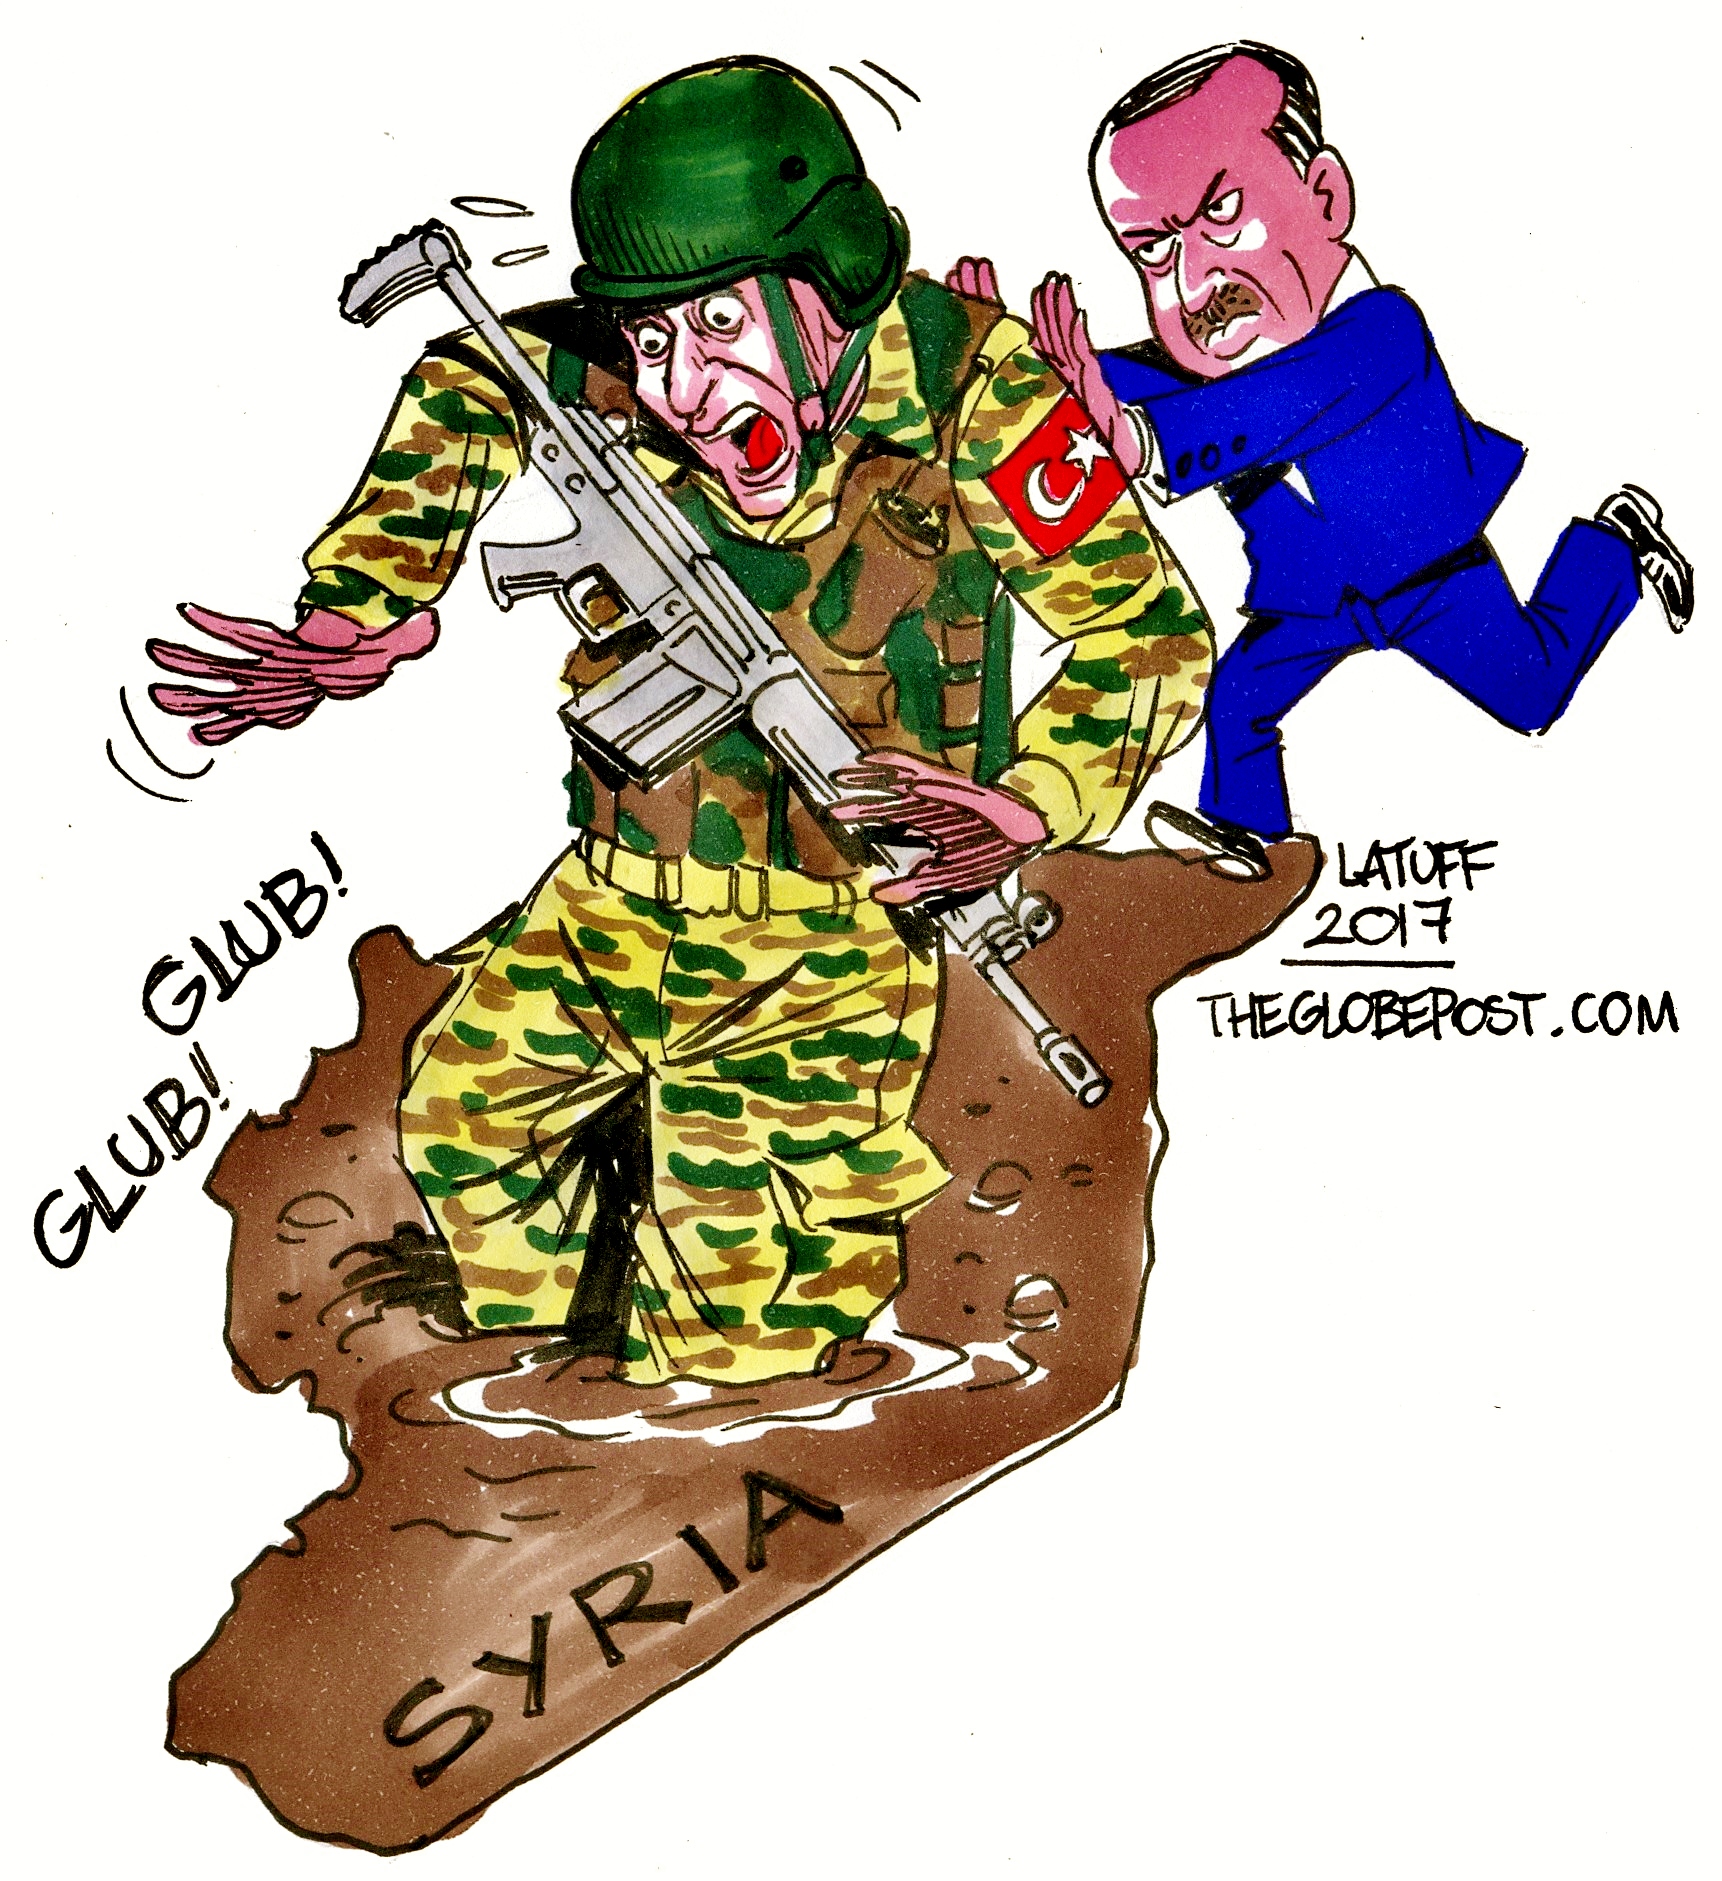 Syria Turned Into Deadly Quagmire For Turkish Soldiers - Cartoon